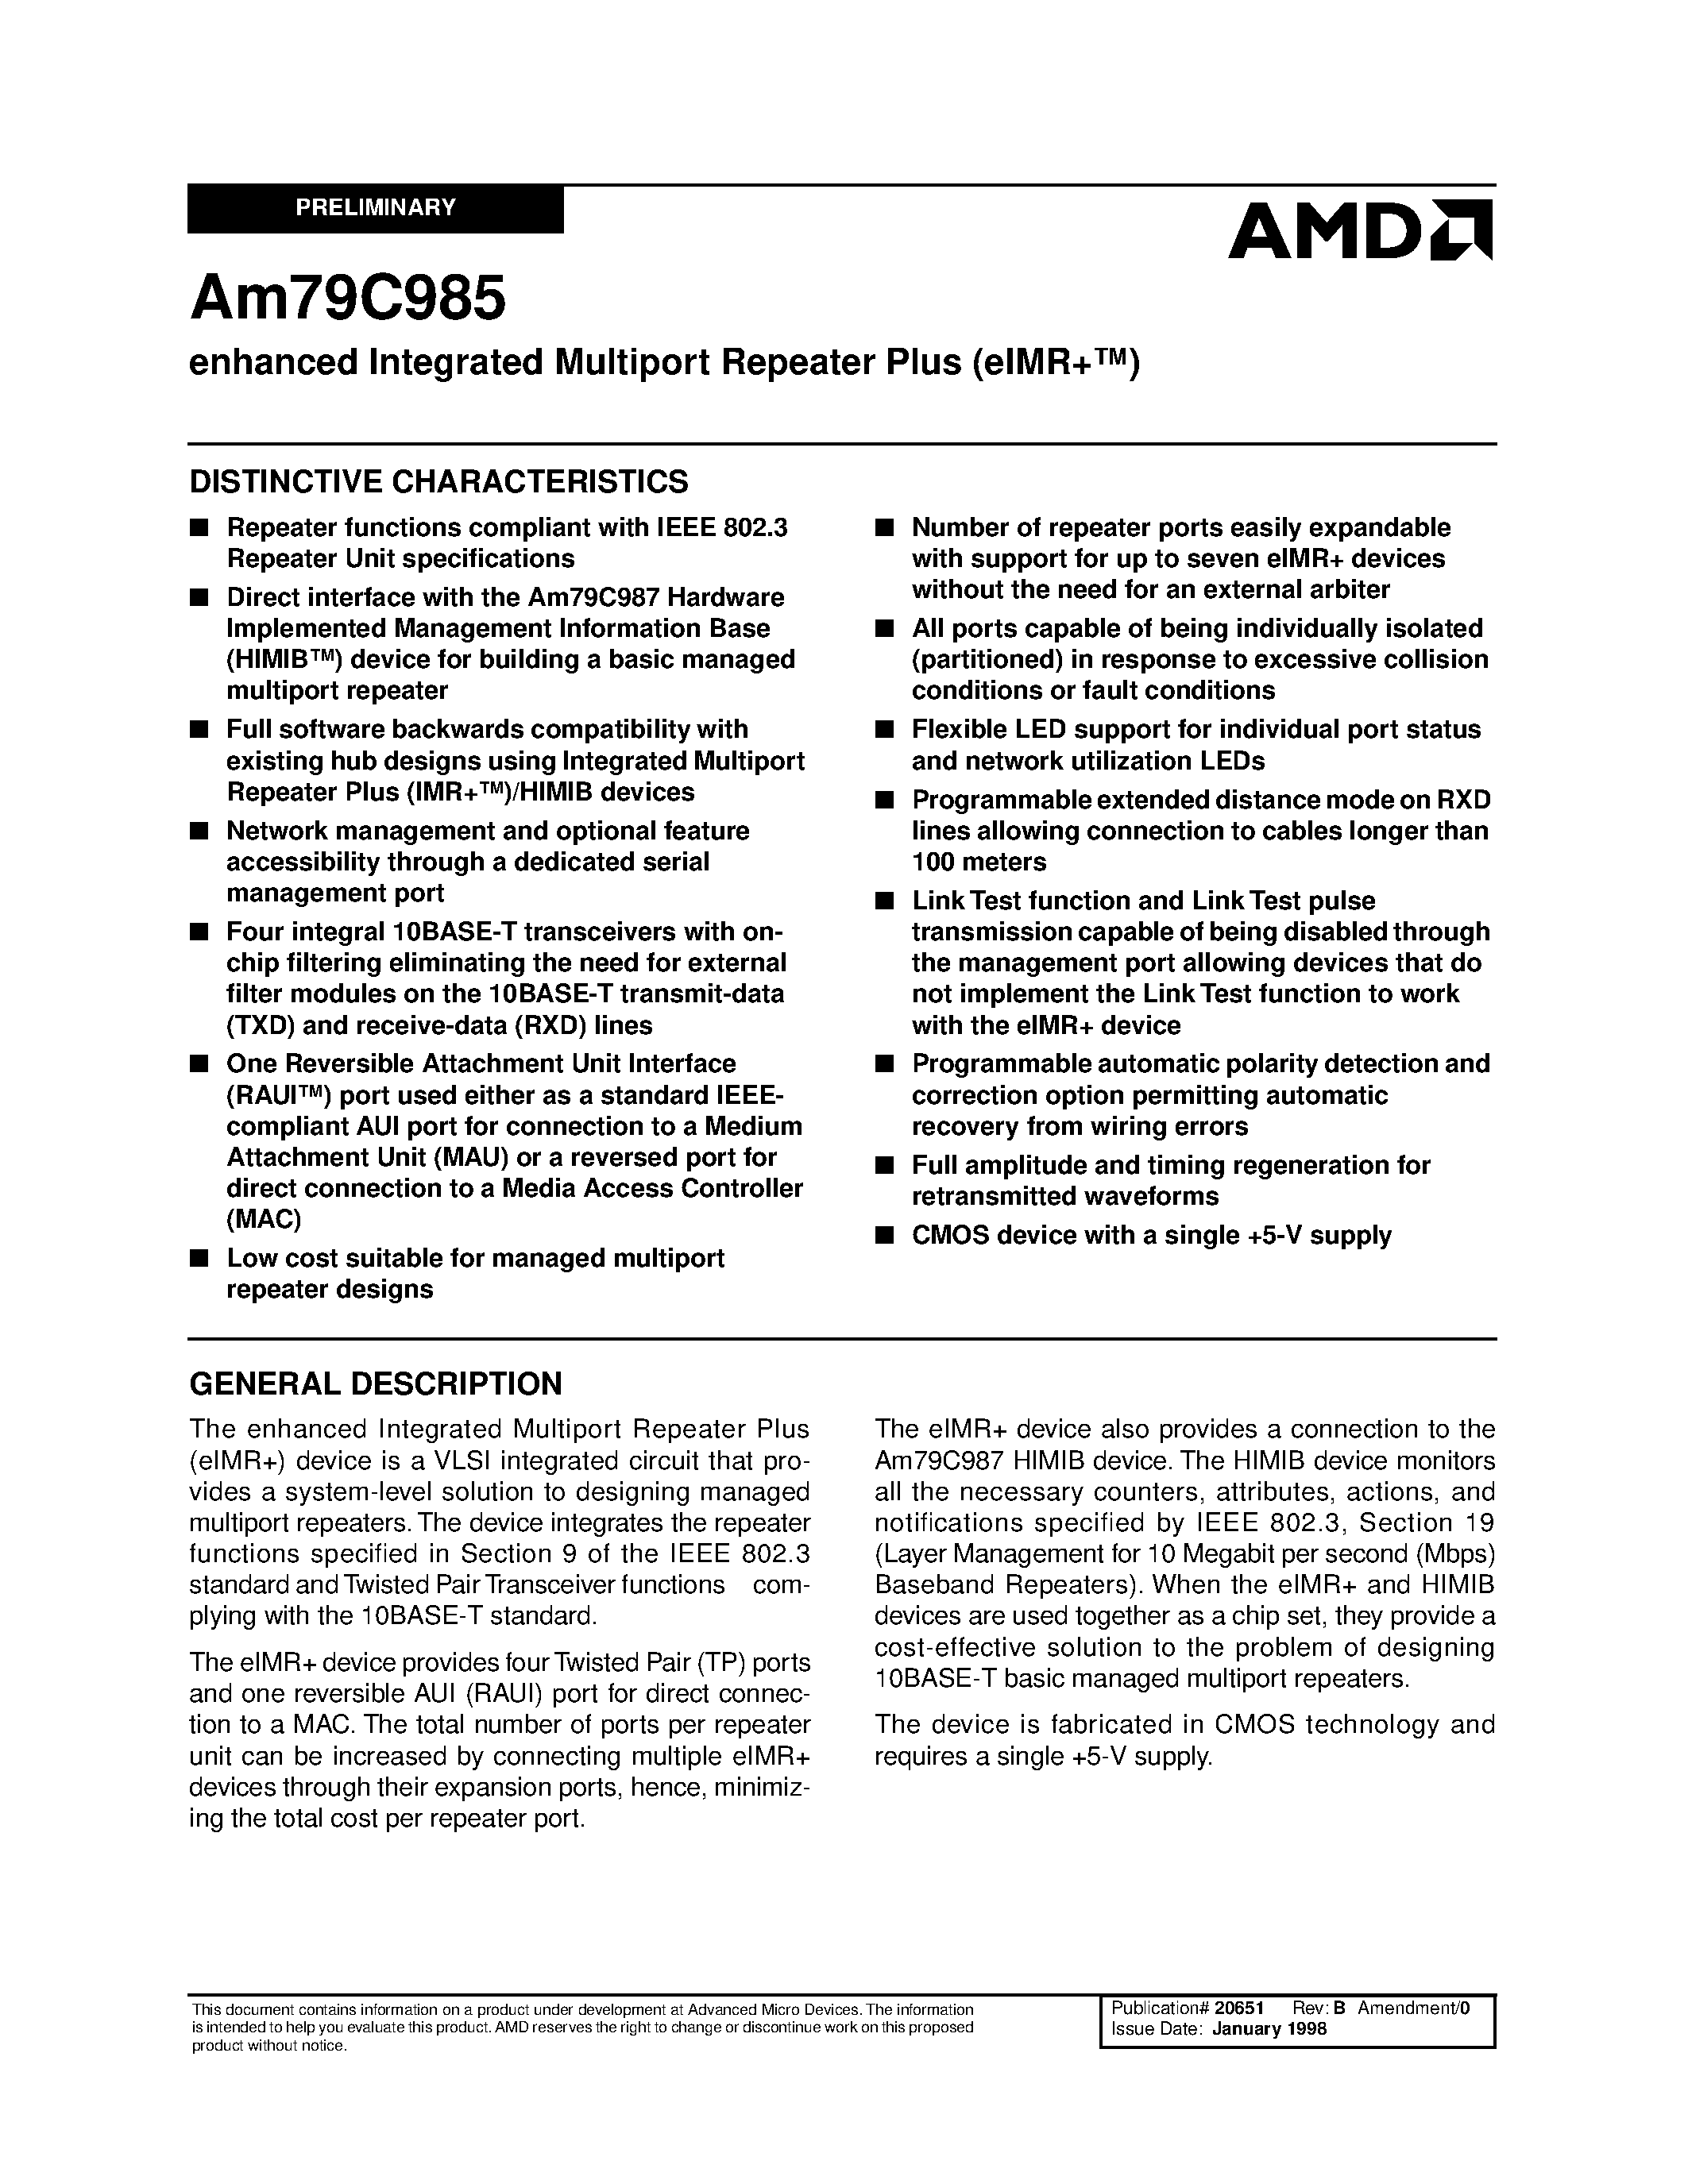 Datasheet Am79C985JC - enhanced Integrated Multiport Repeater Plus (eIMR+) page 1